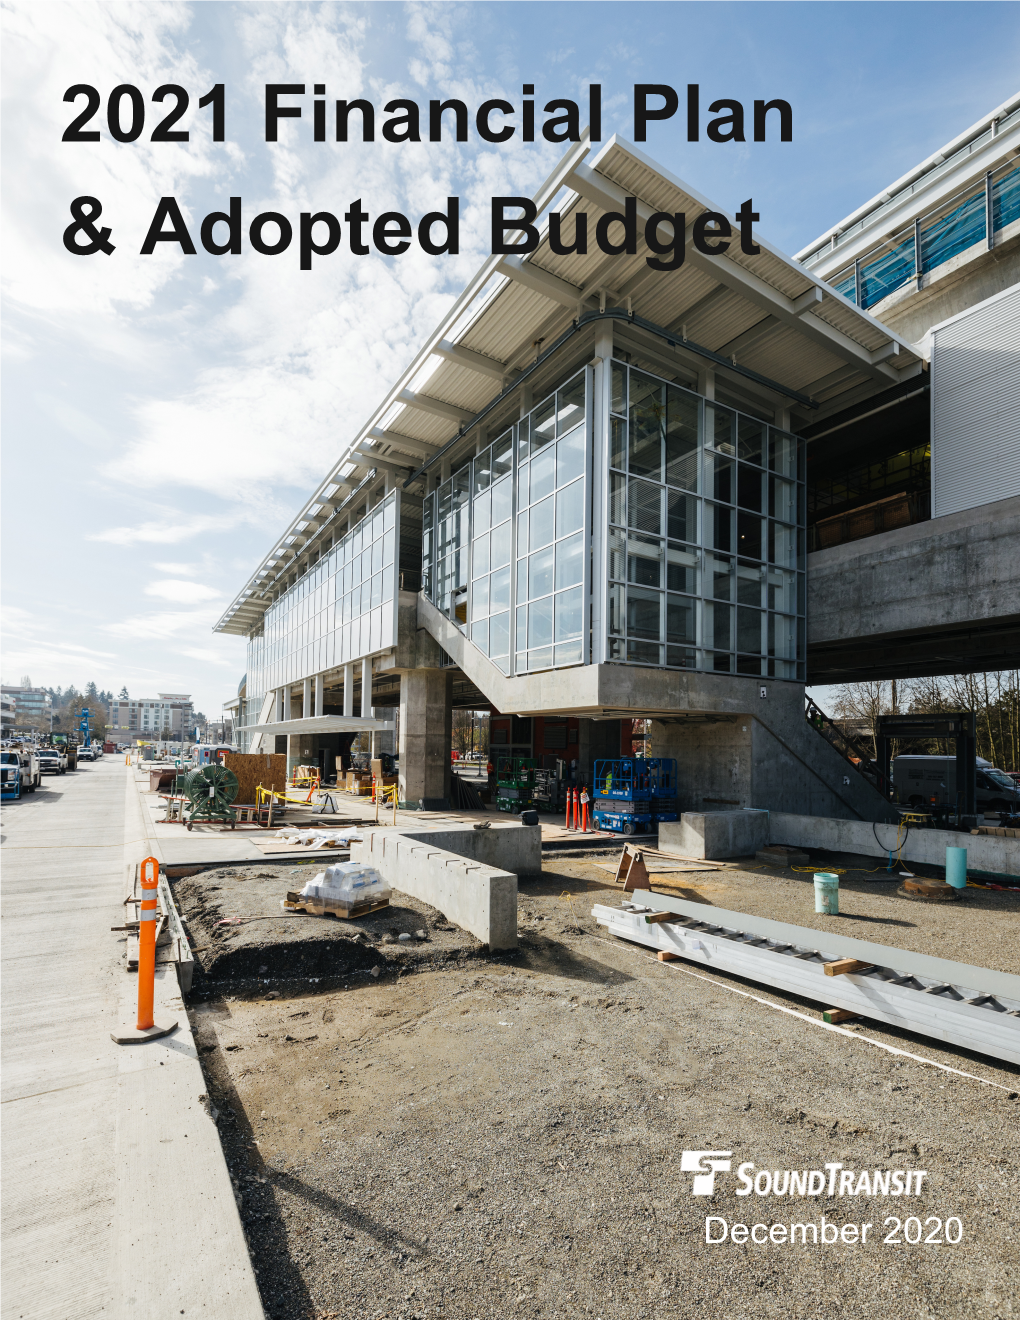 2021 Financial Plan and Adopted Budget Document, the 2021 Annual Project Cash Flows Are Updated to Reflect Actual Capital Outlays for the Preceding Year (2020)